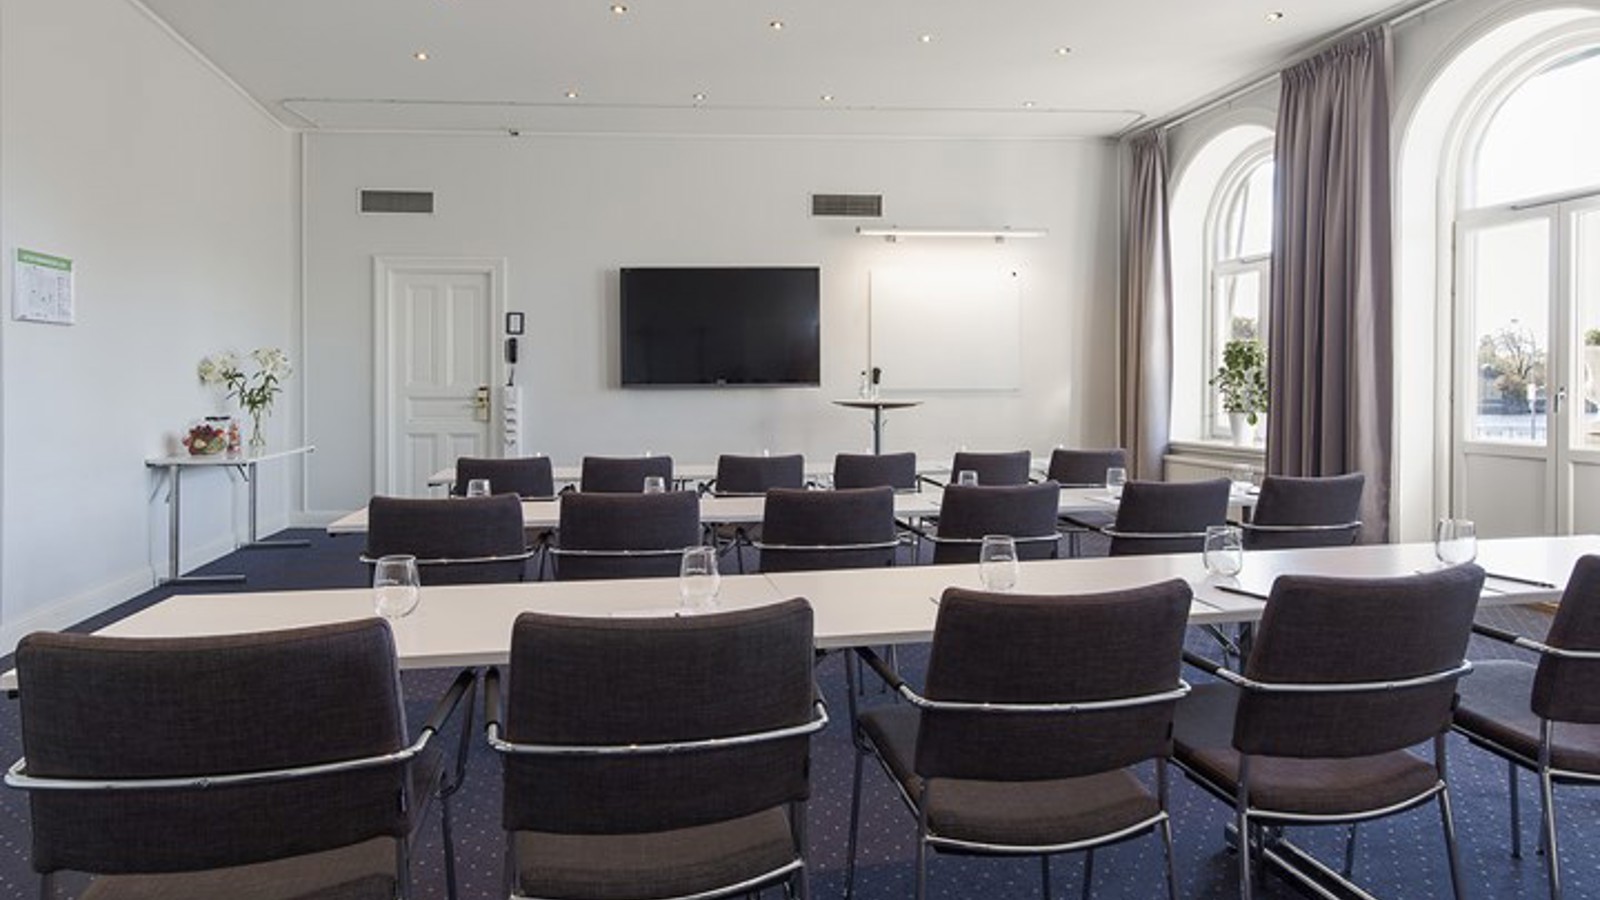 Conference room with crescent windows and a TV screen